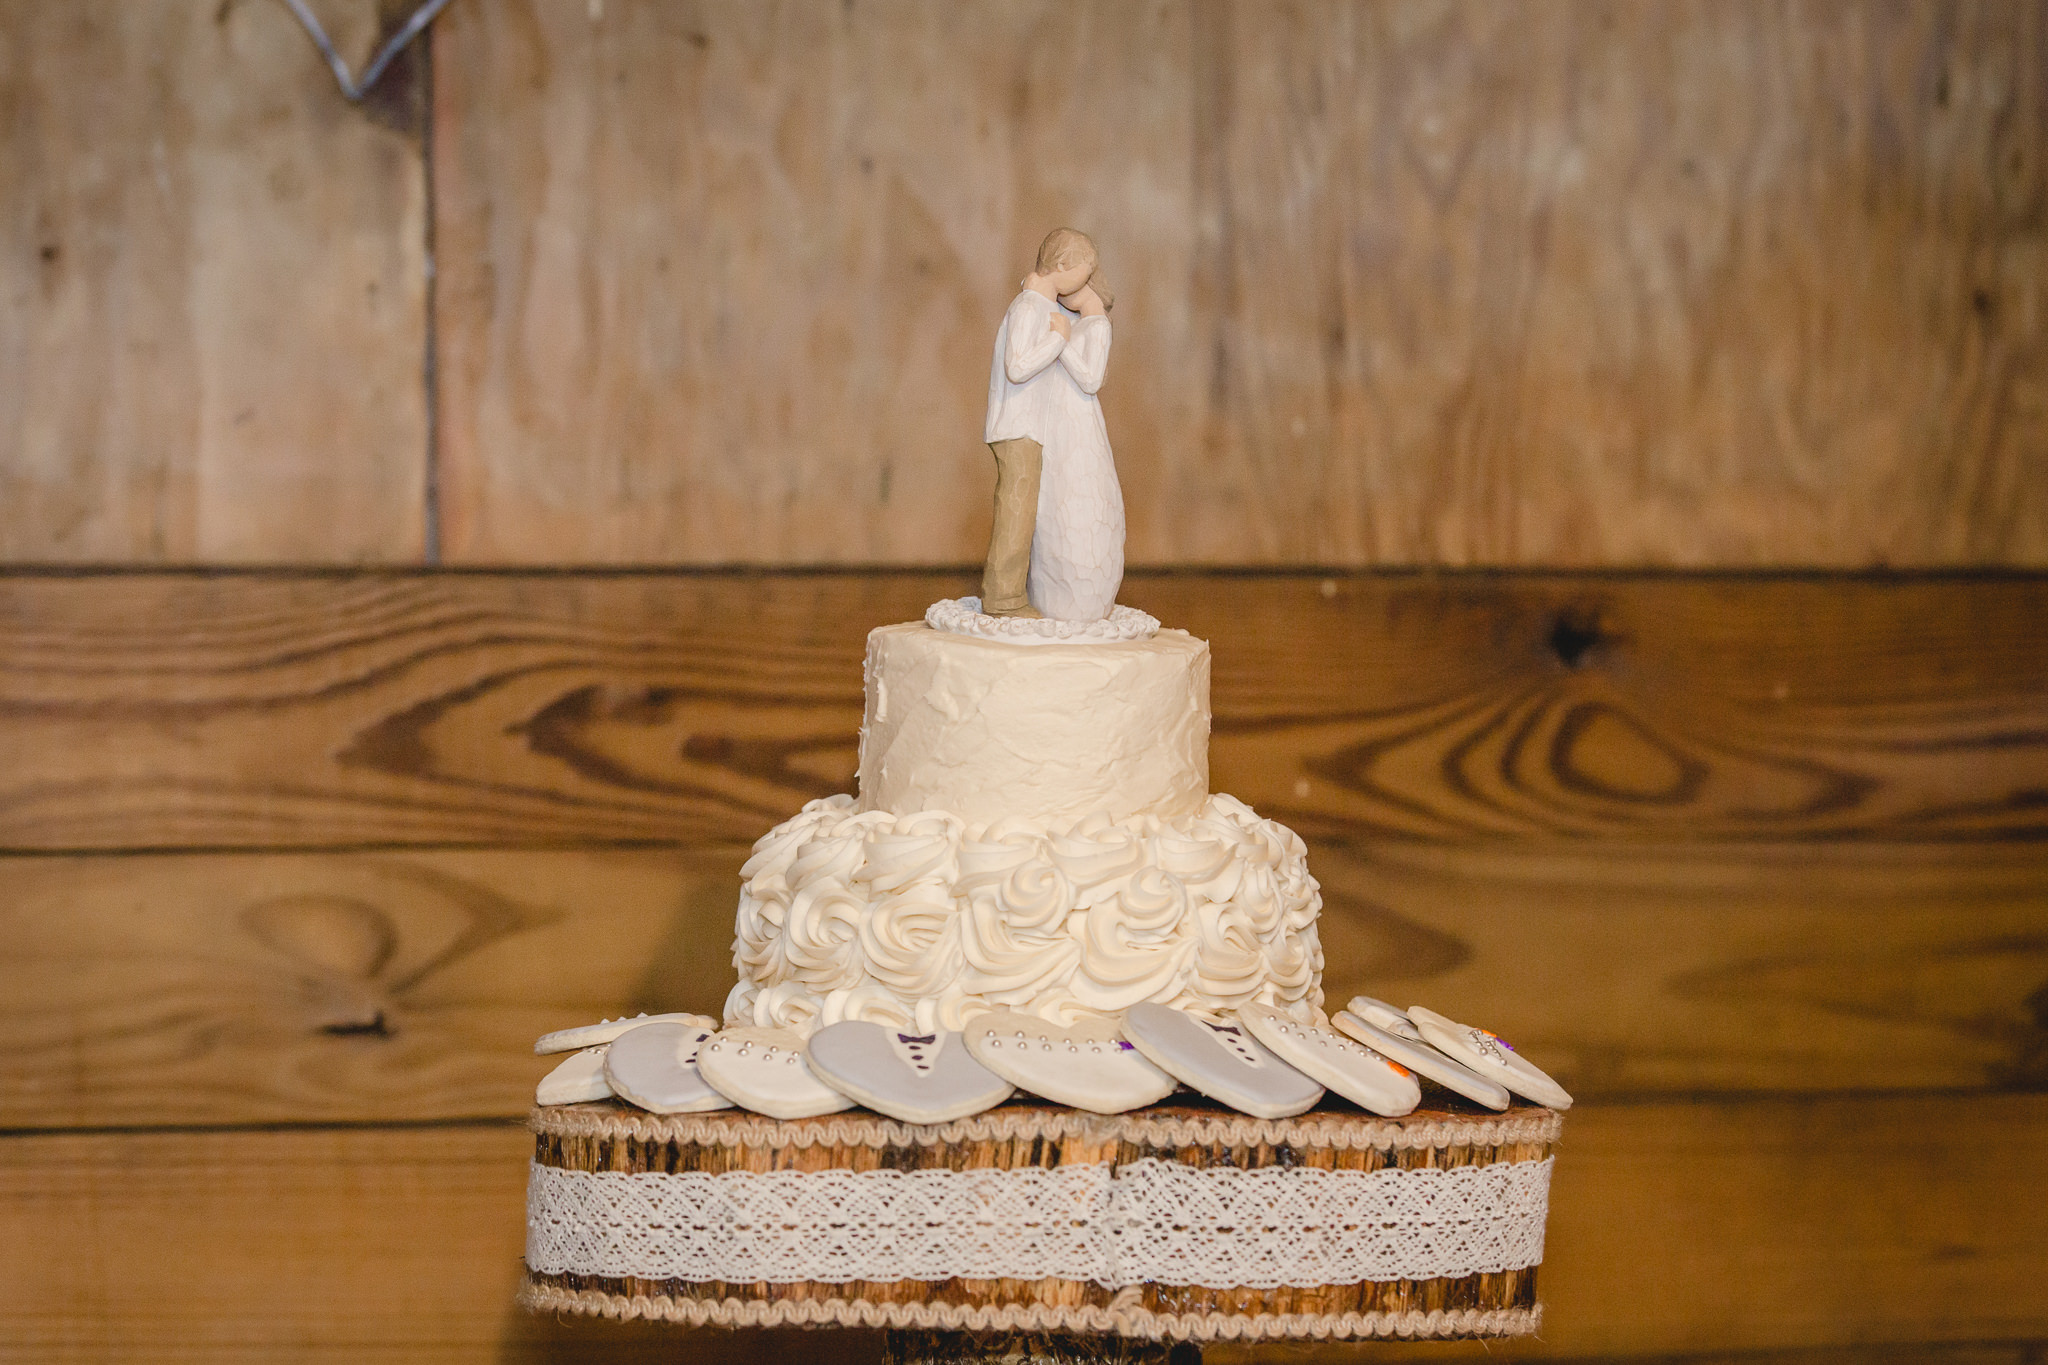 Wedding cake by Giant Eagle at the Barn at Soergel Hollow